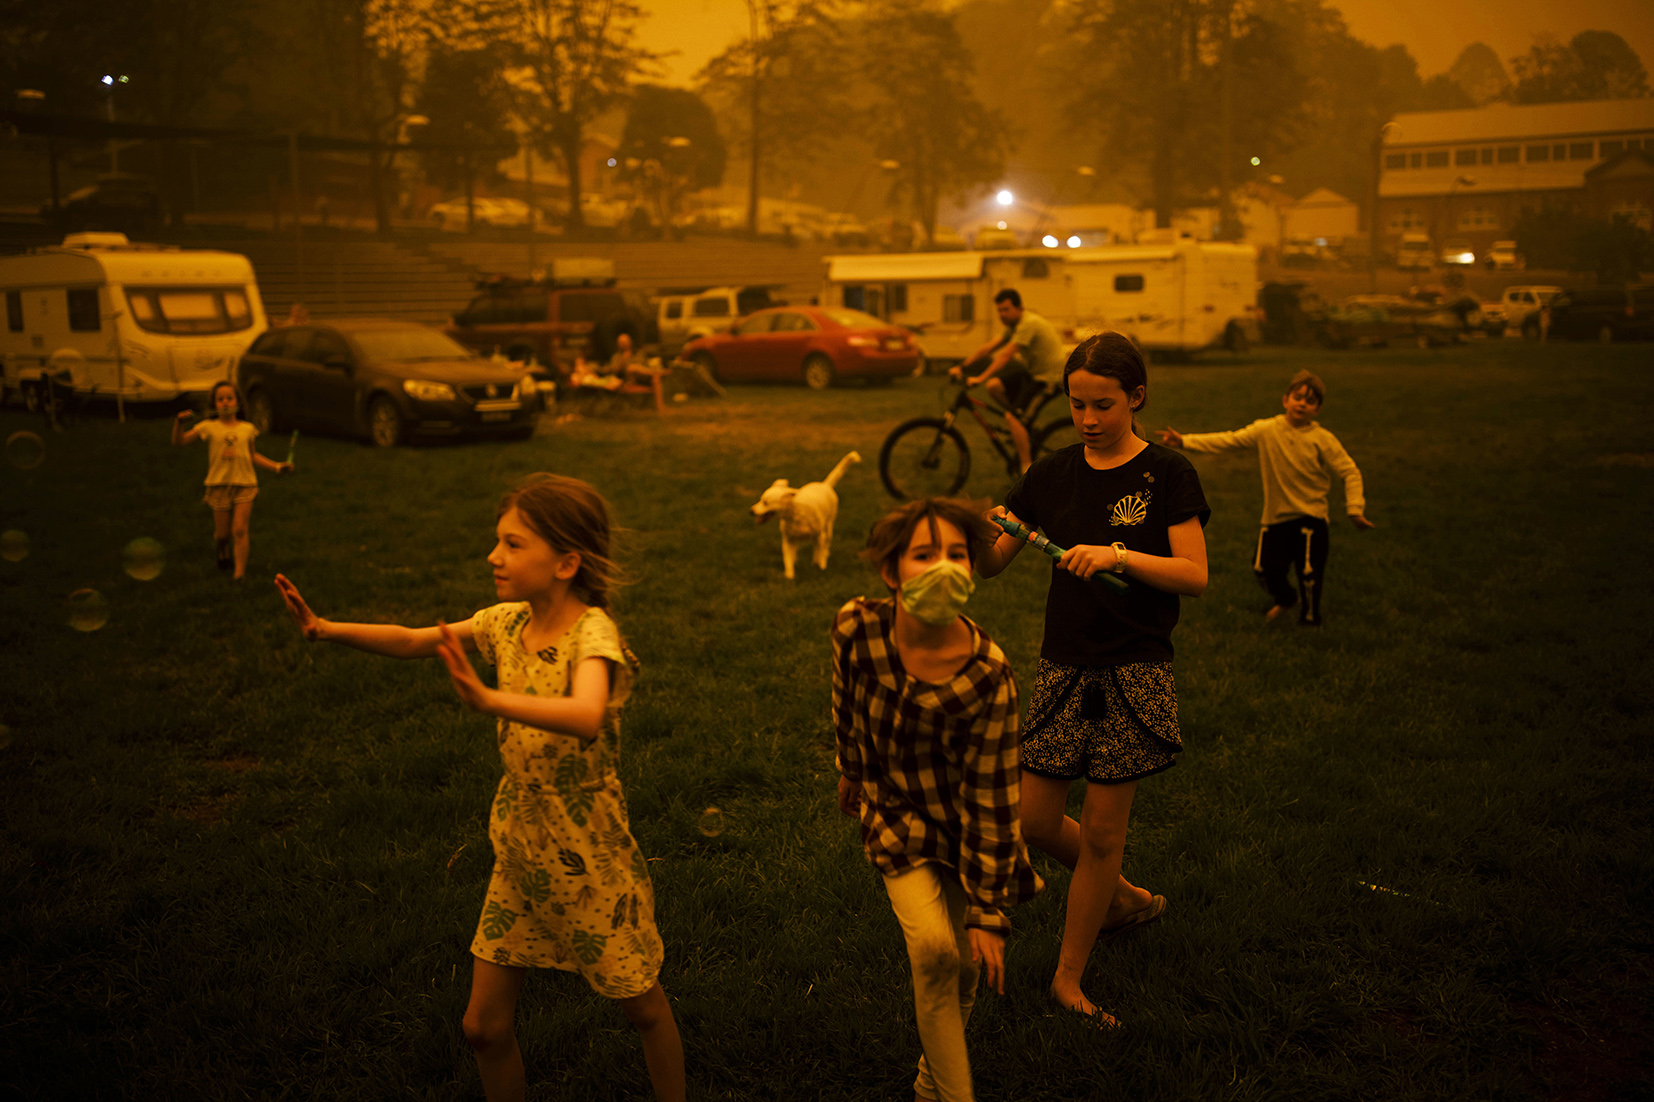 Photograph featuring children playing on a sports field. One wears a face mask. The sky and light are tinged orange with smoke. 